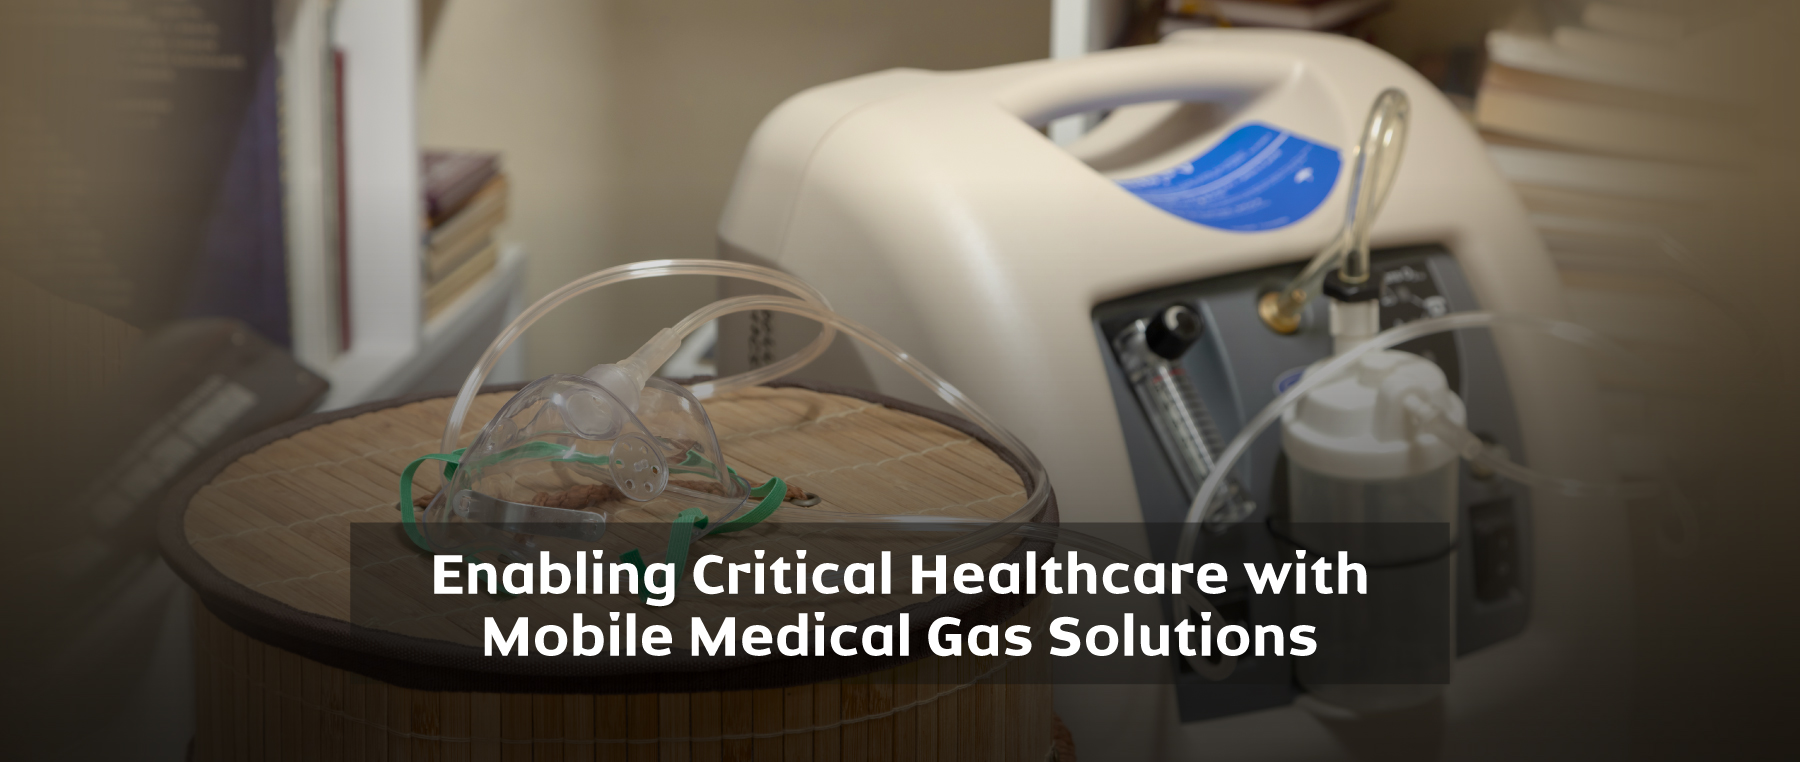 Enabling Critical Healthcare with Mobile Medical Gas Solutions